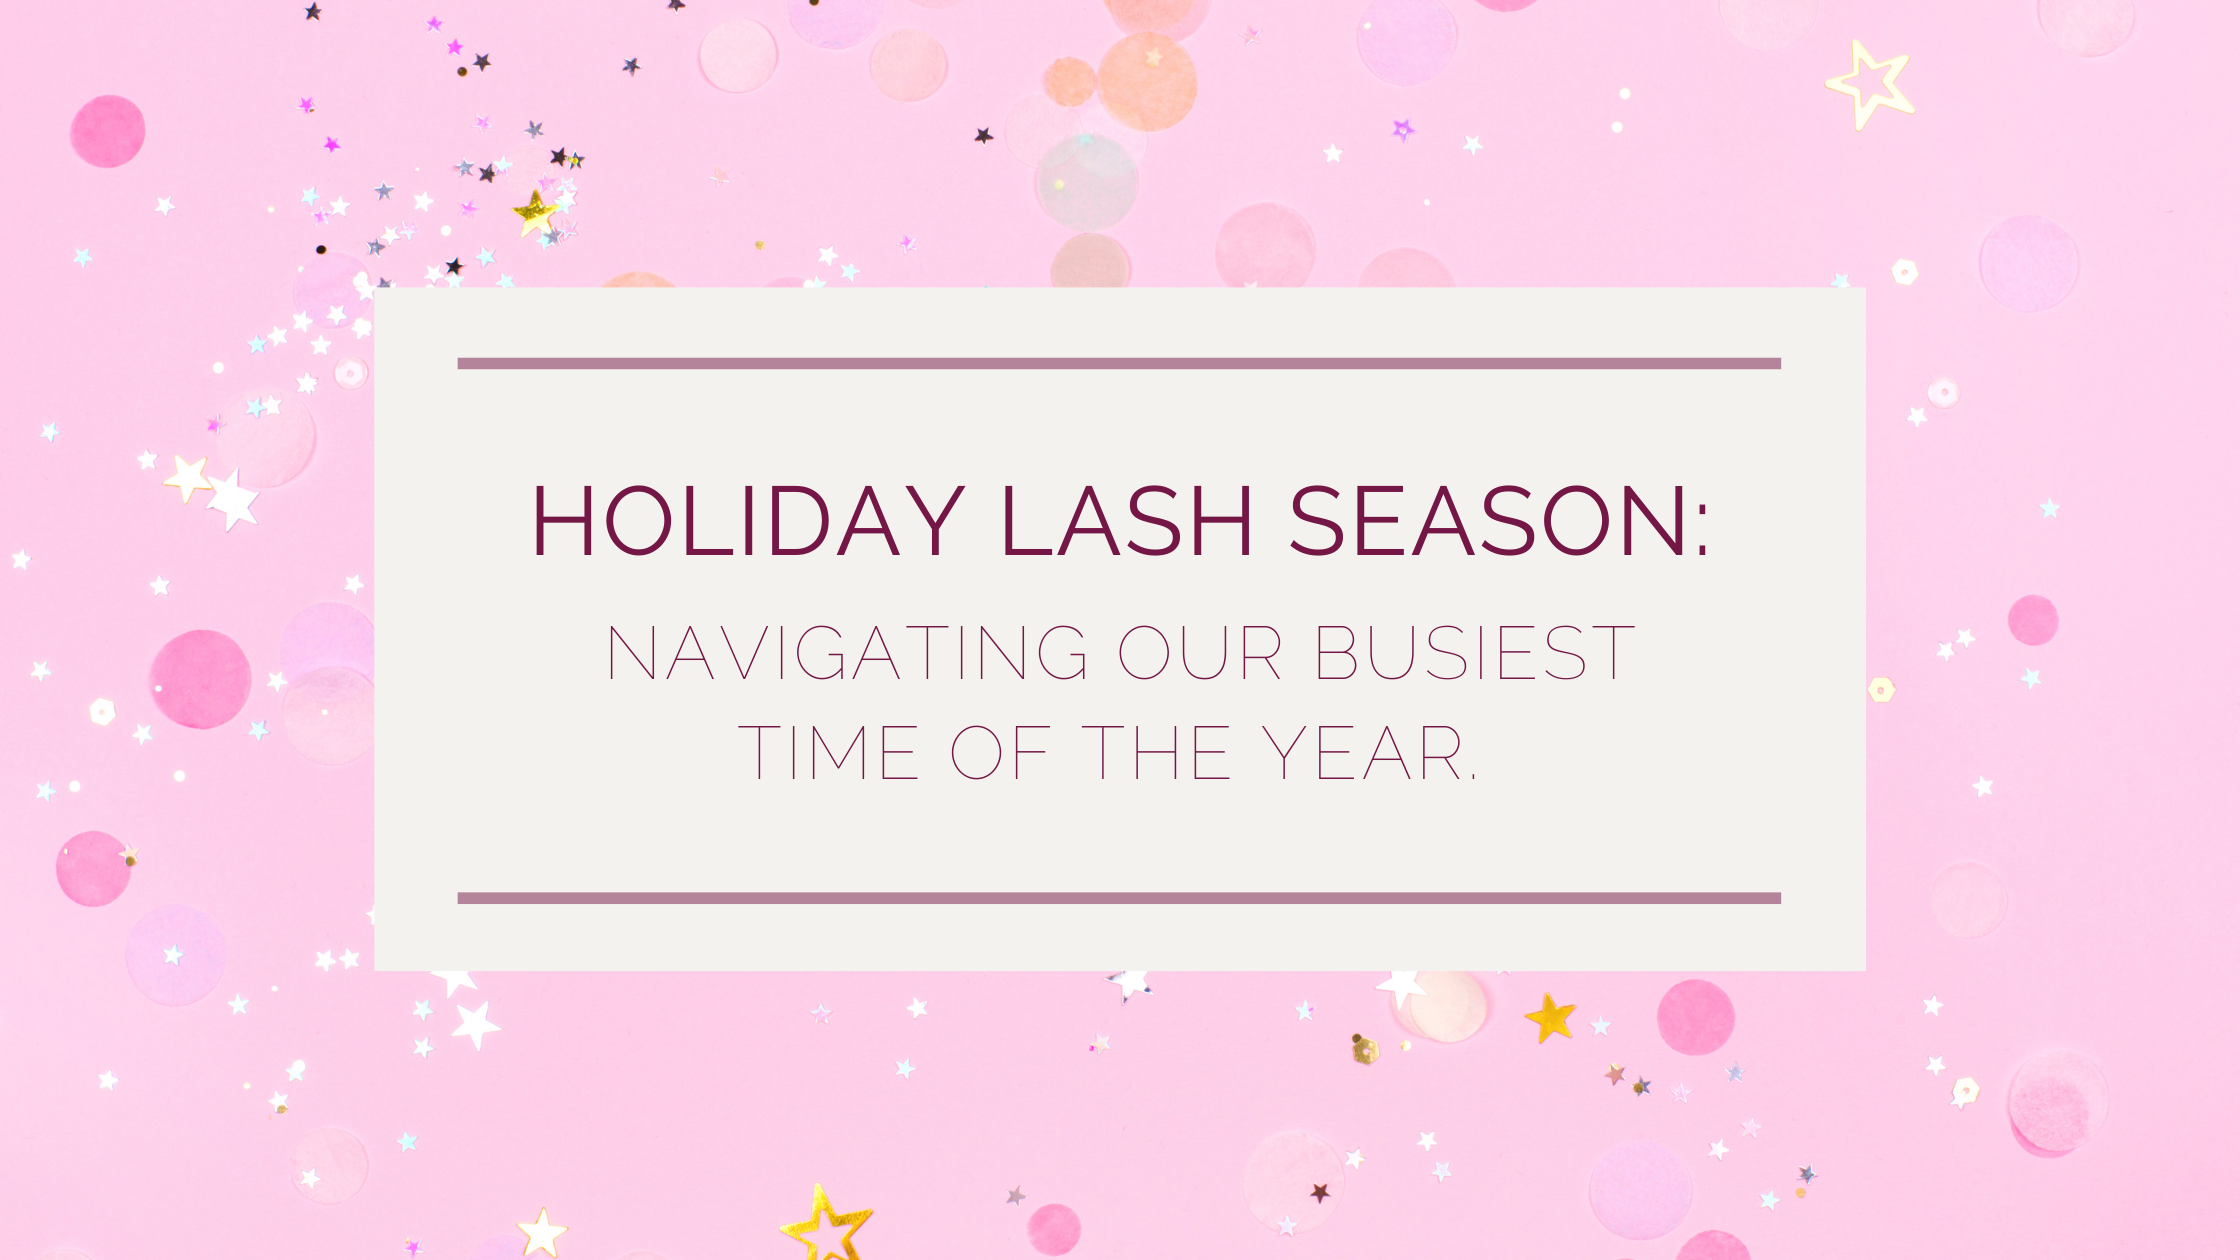 Holiday Lash Season: Navigating Our Busiest Time Of The Year!